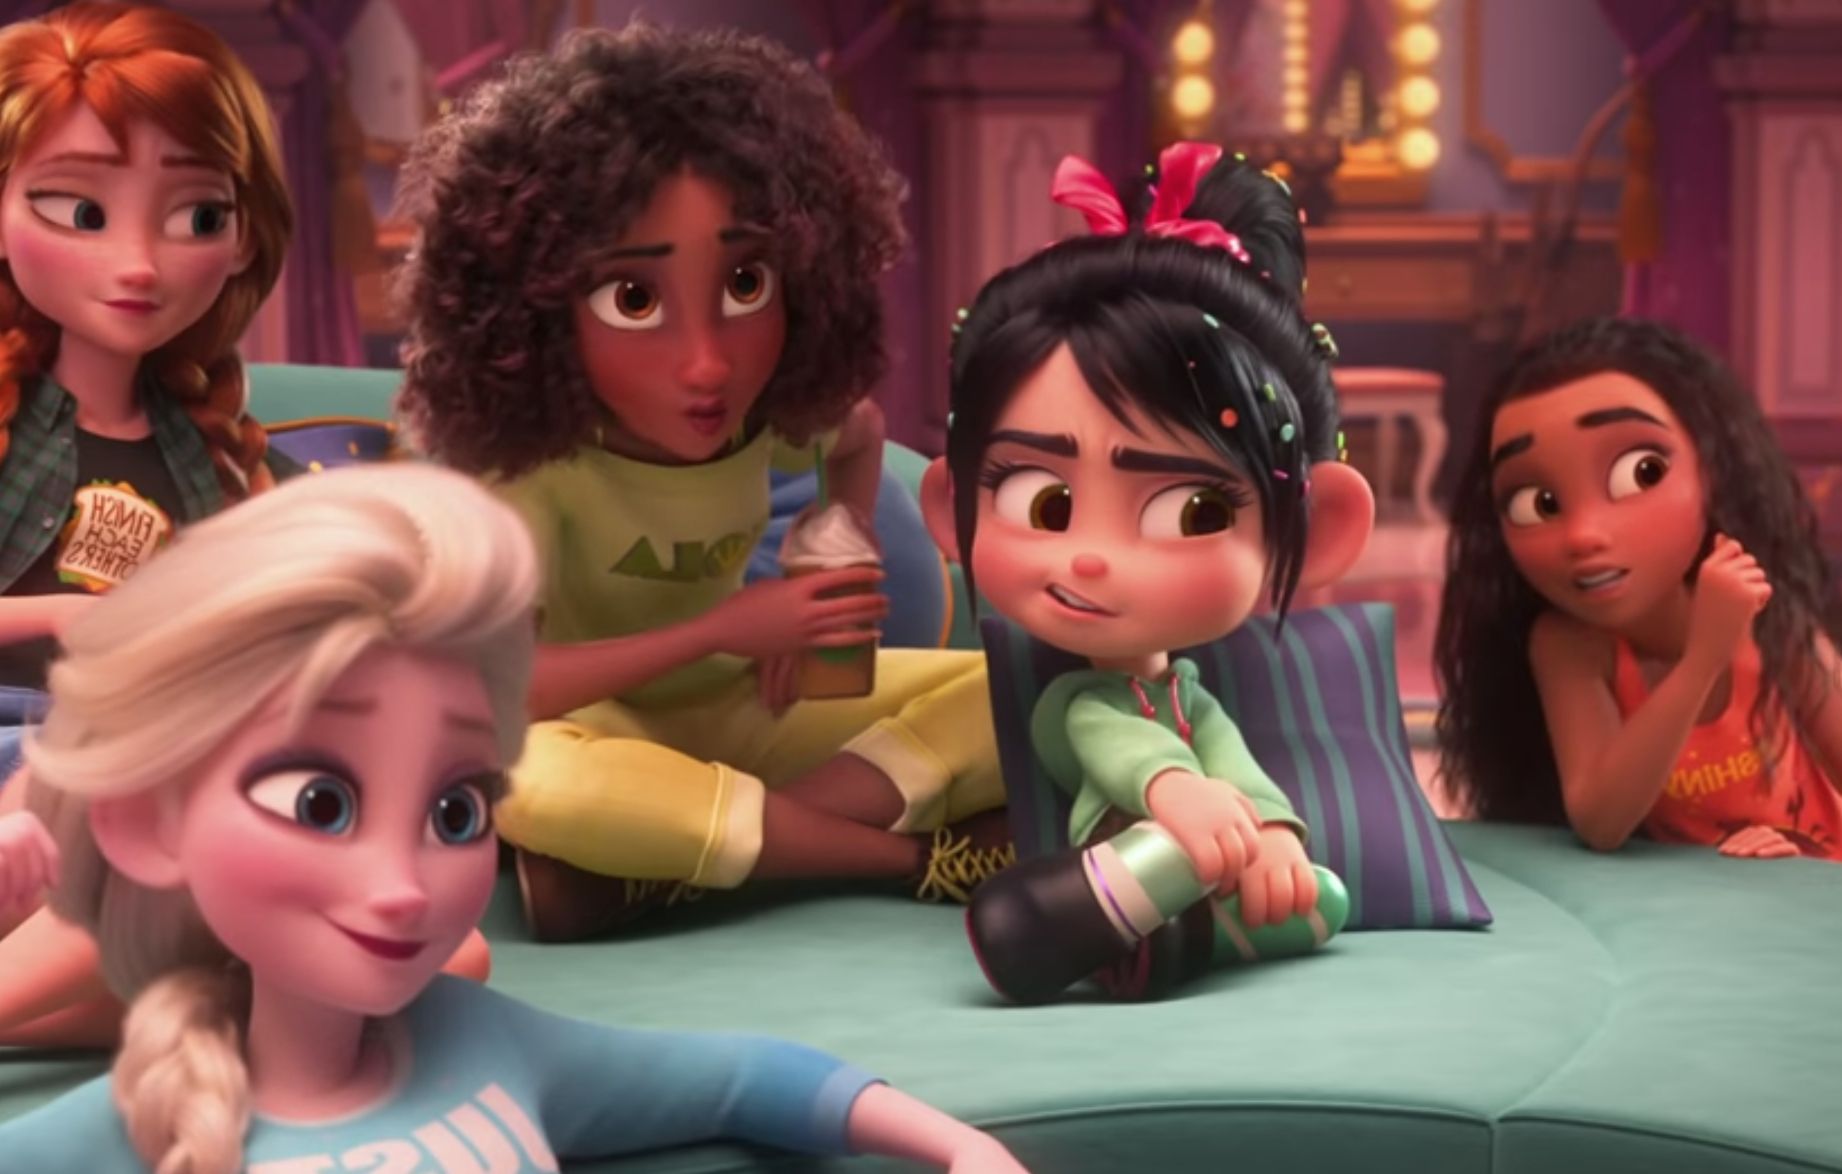 Popular Princess Like Side Prom Downdos Intended For Ralph Breaks The Internet' Receives Criticism For Appearance Of (View 12 of 20)